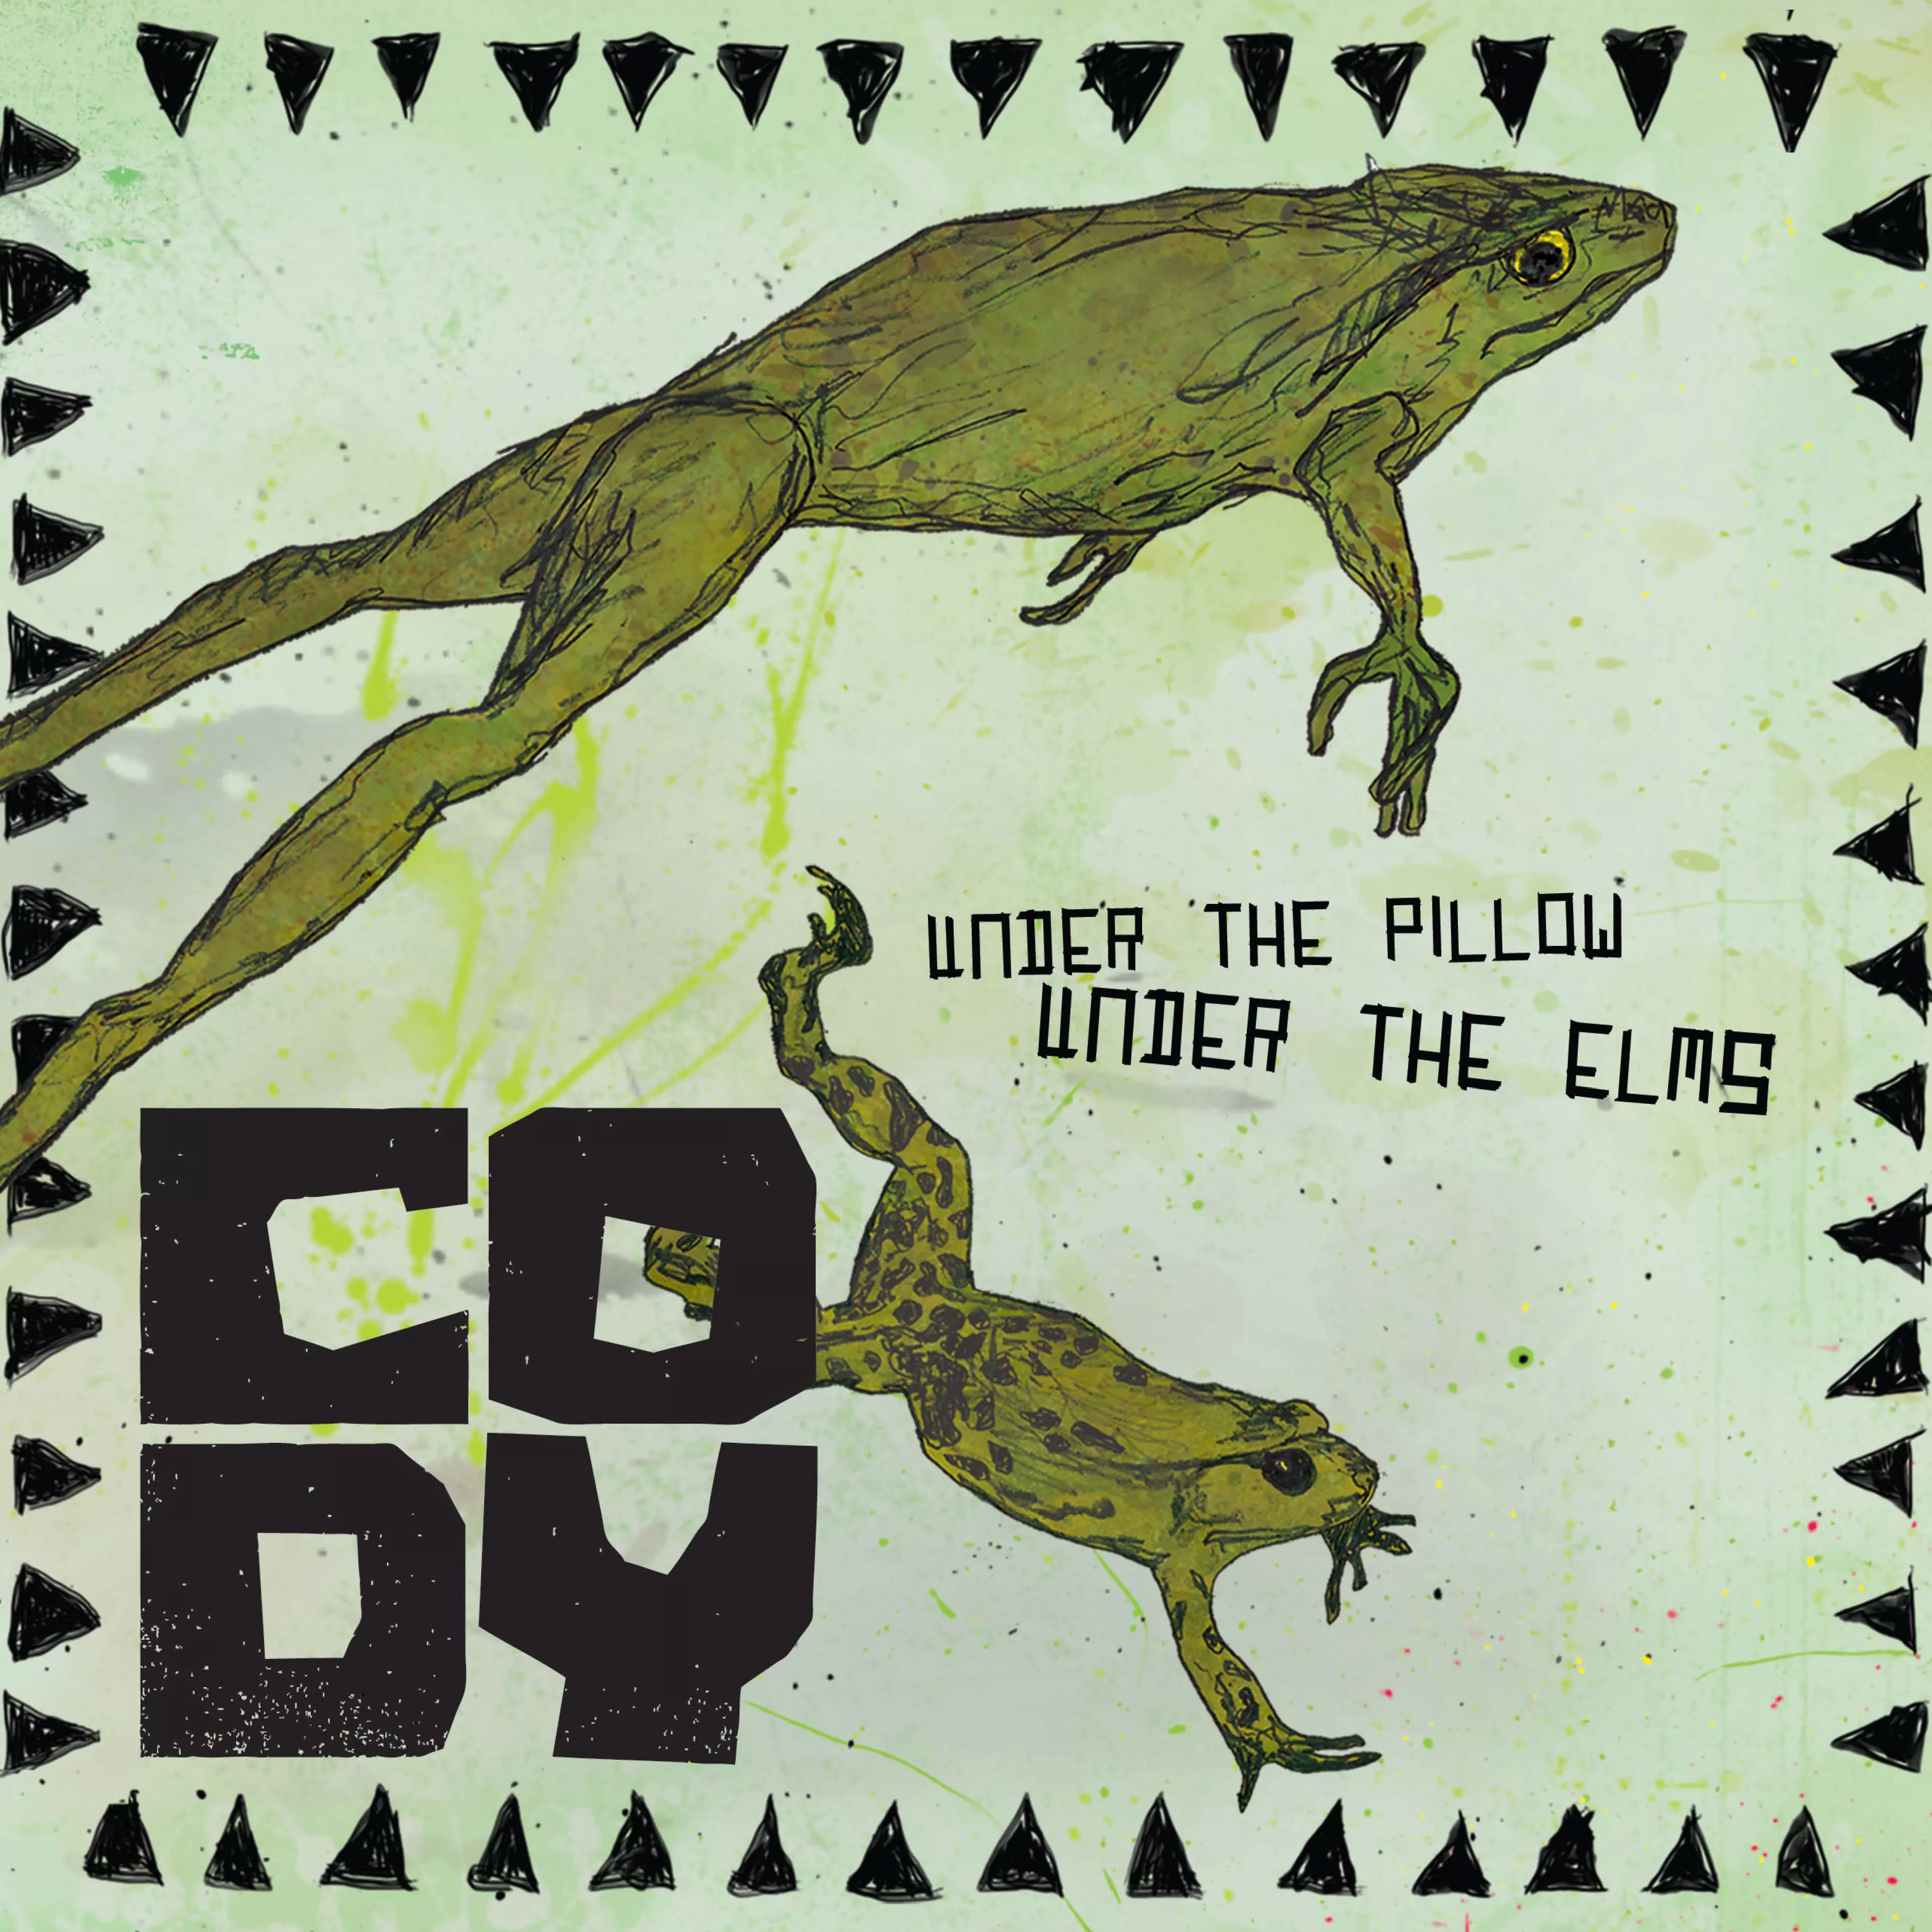 Under The Pillow, Under The Elms - Cody